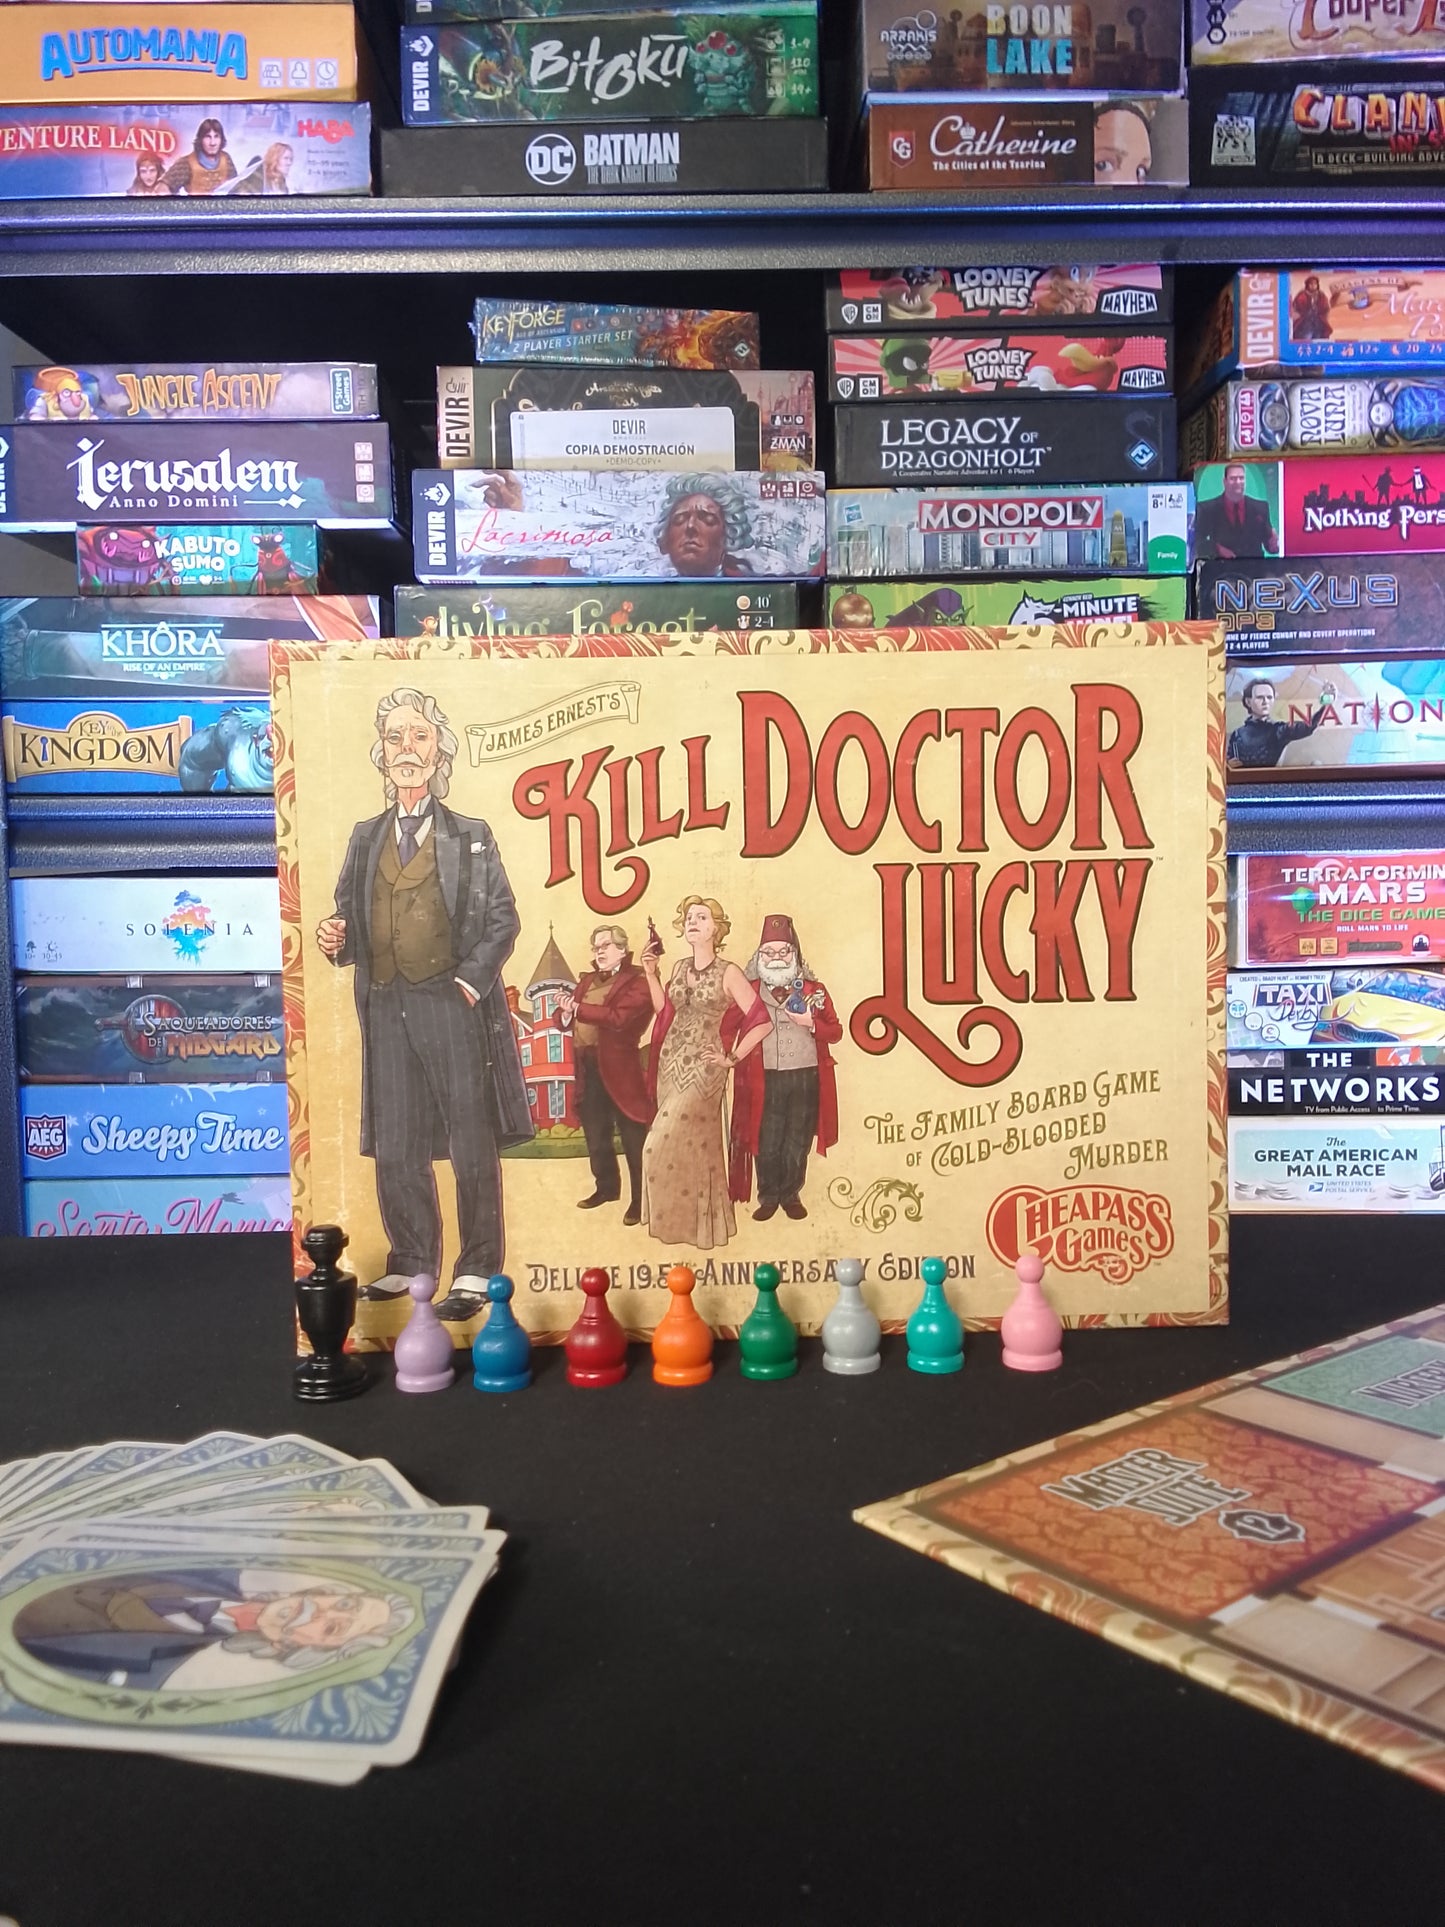 B2G - Kill doctor Lucky (Deluxe 19.5th anniversary edition) - para alquilar